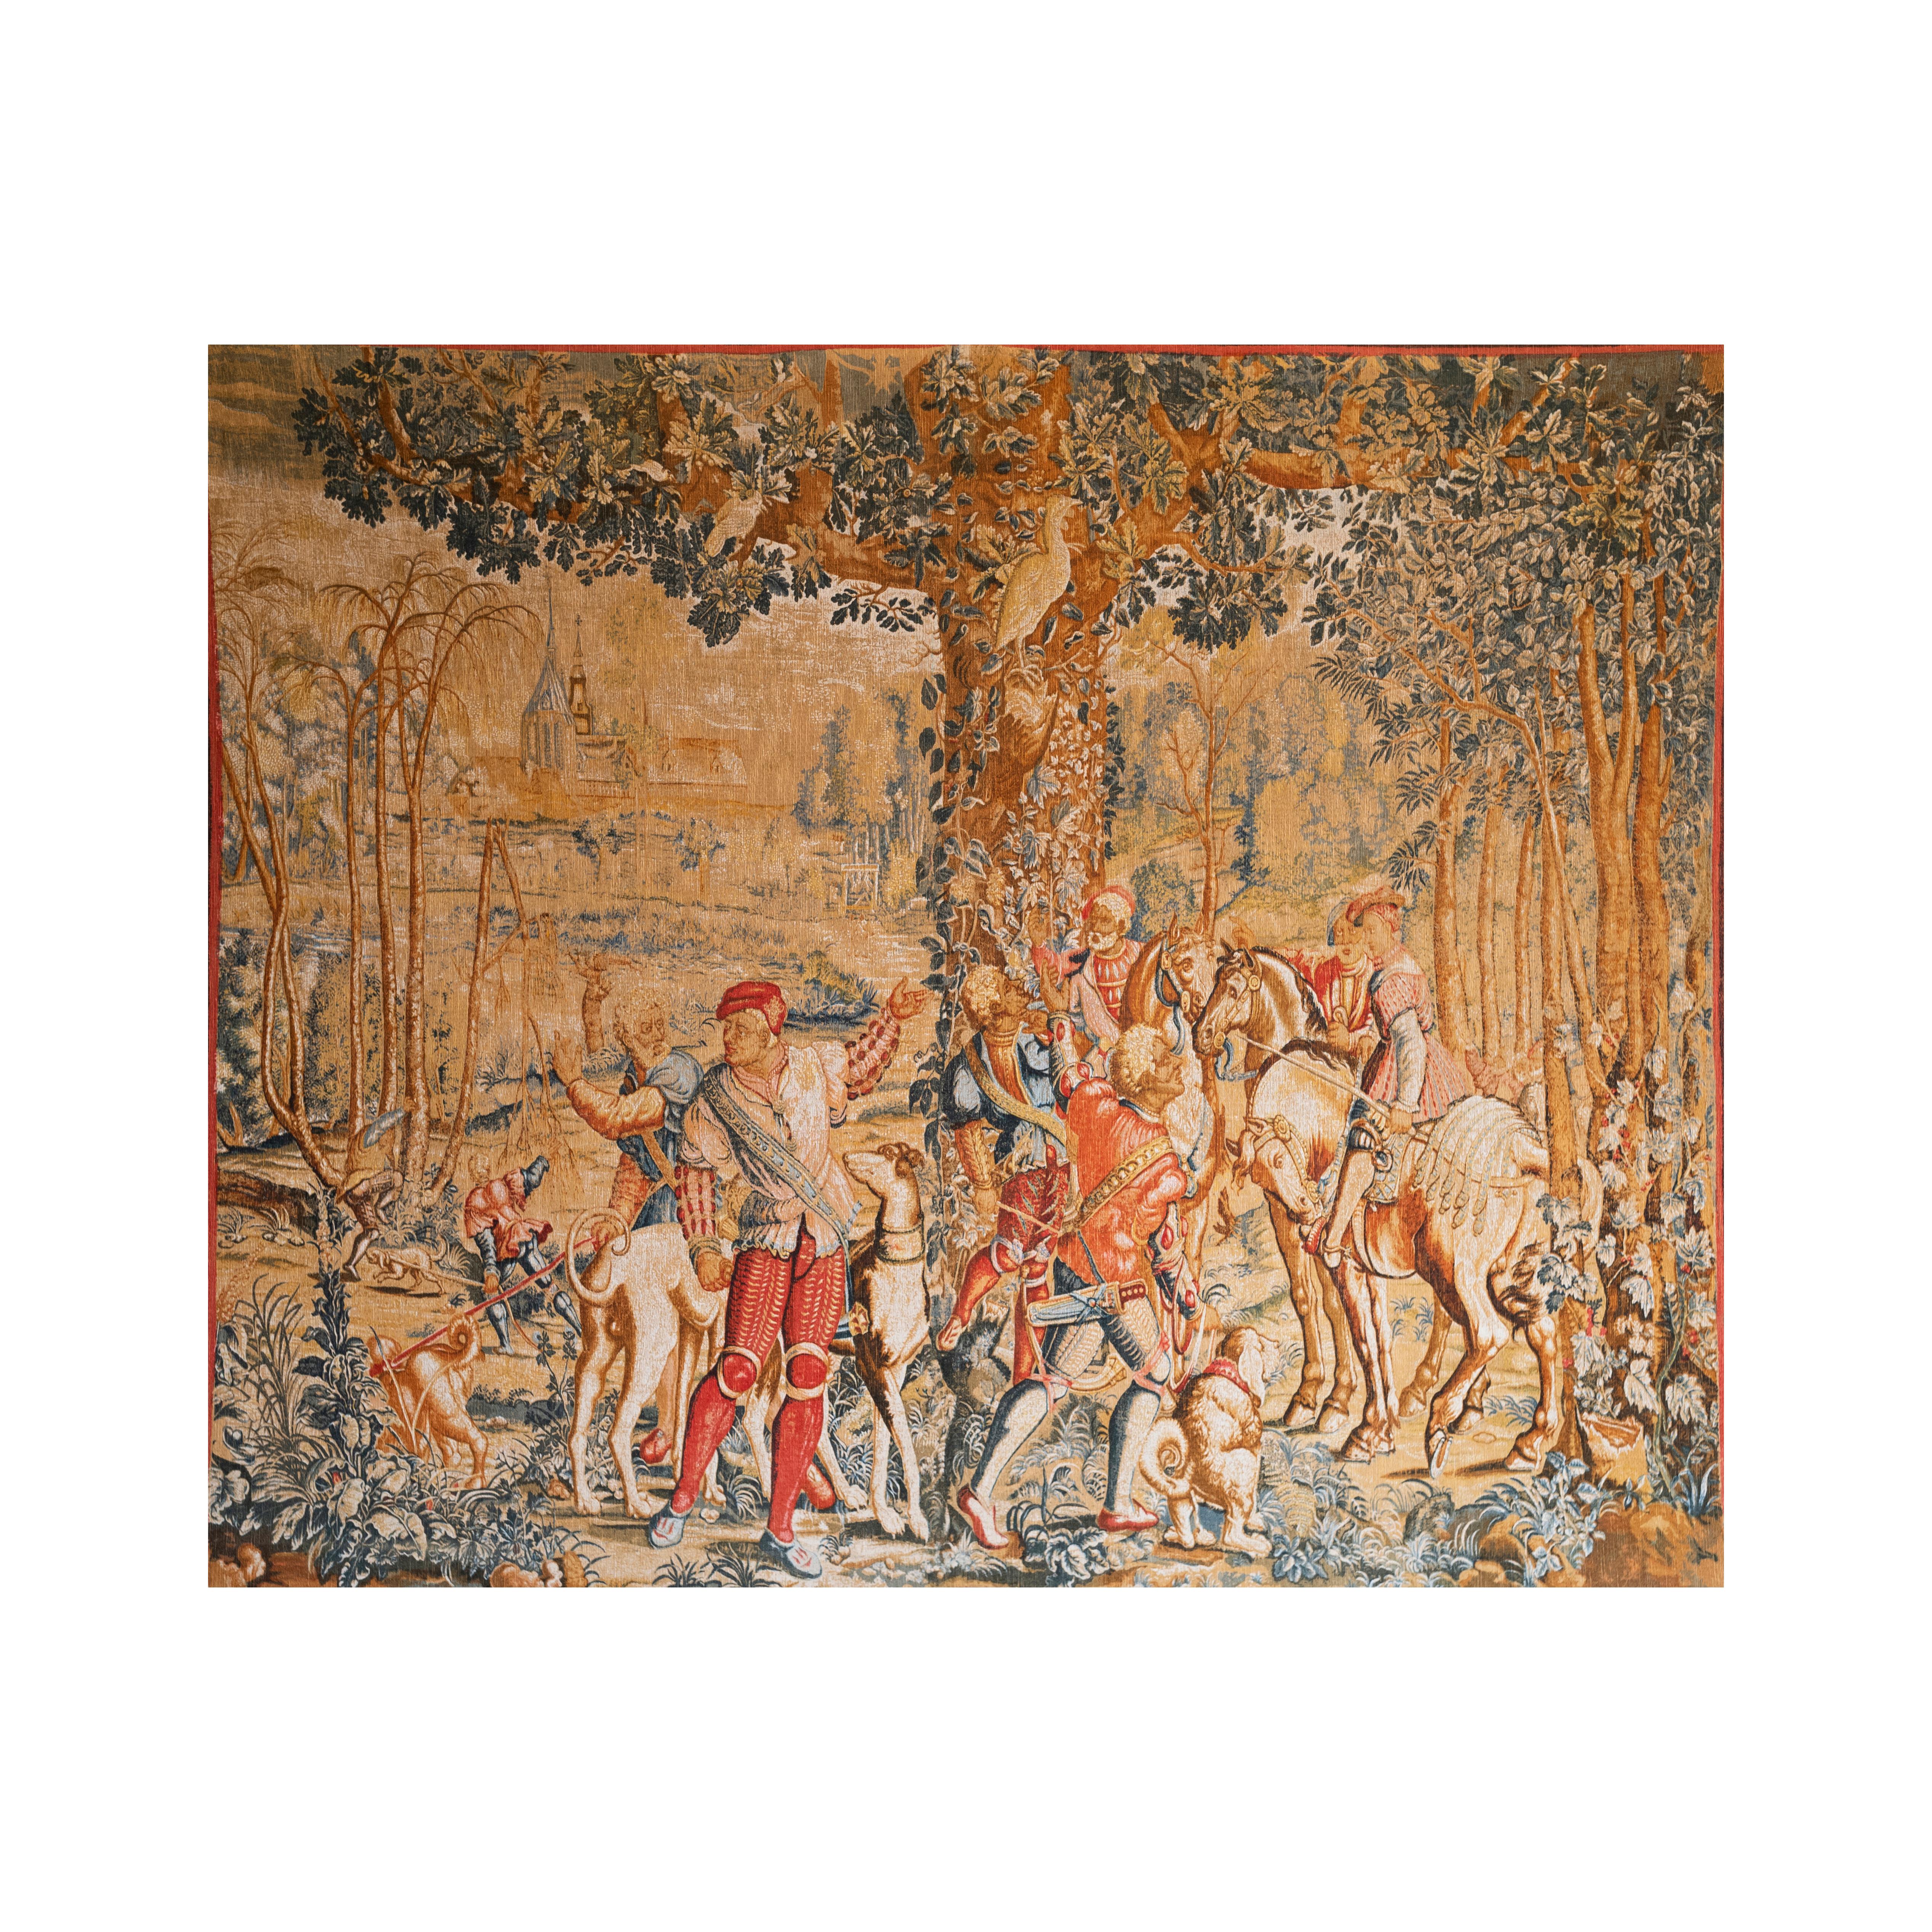 Painted French Rococo Wall-Hanging Inspired by Charles Le Brun